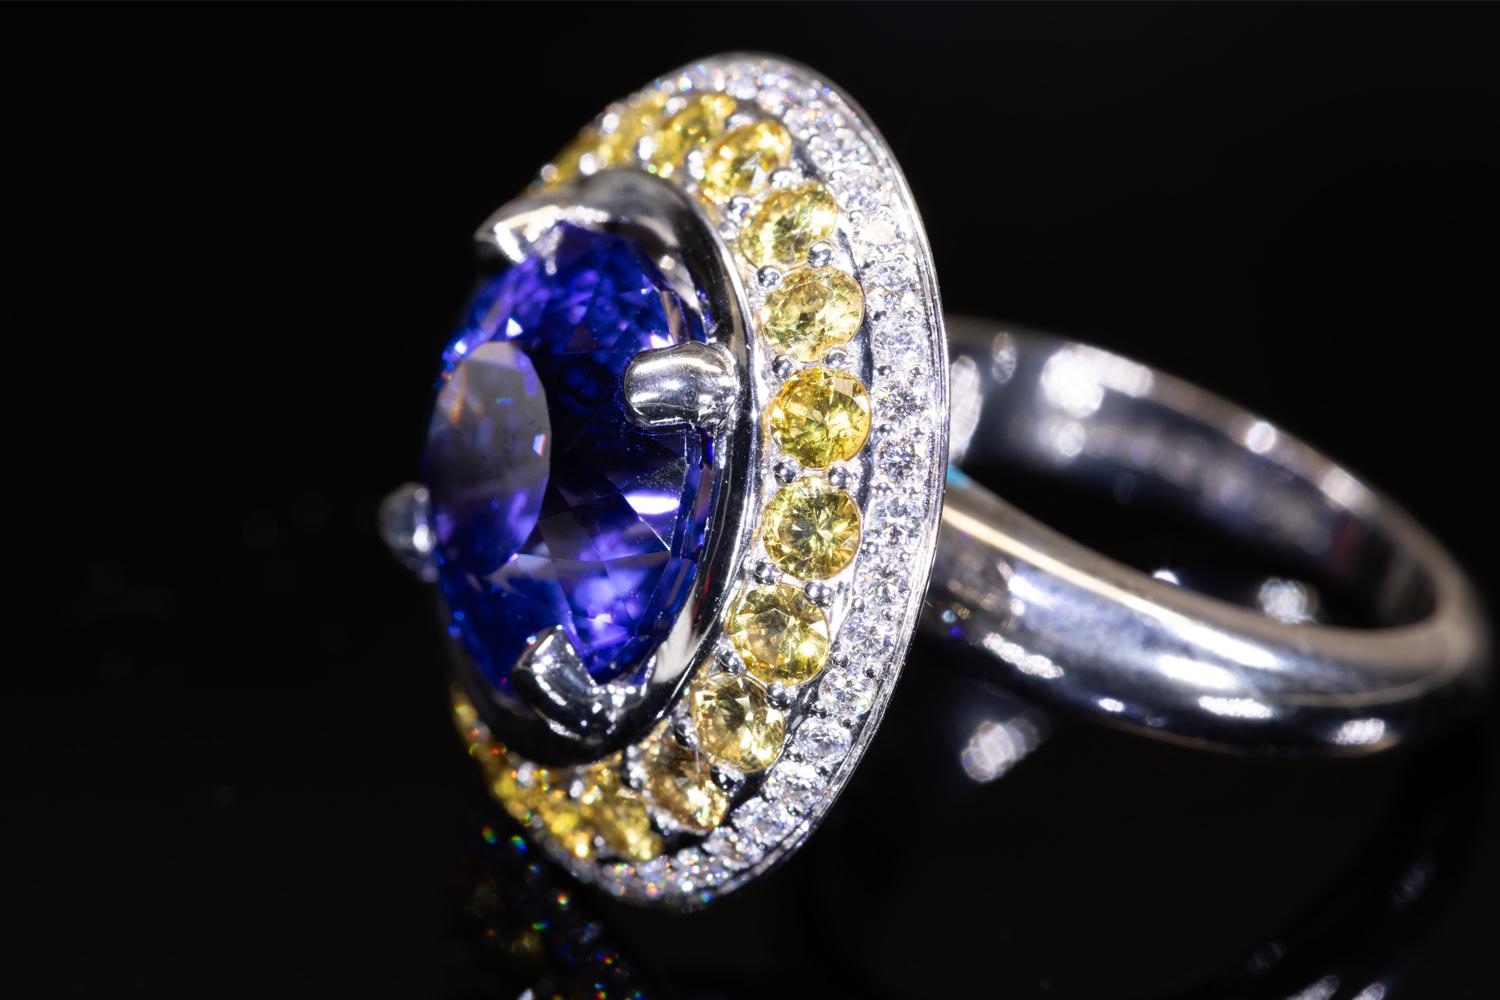 10 Carat Tanzanite Cocktail Ring in 18K WG with Yellow Sapphires & Diamond Halo For Sale 1